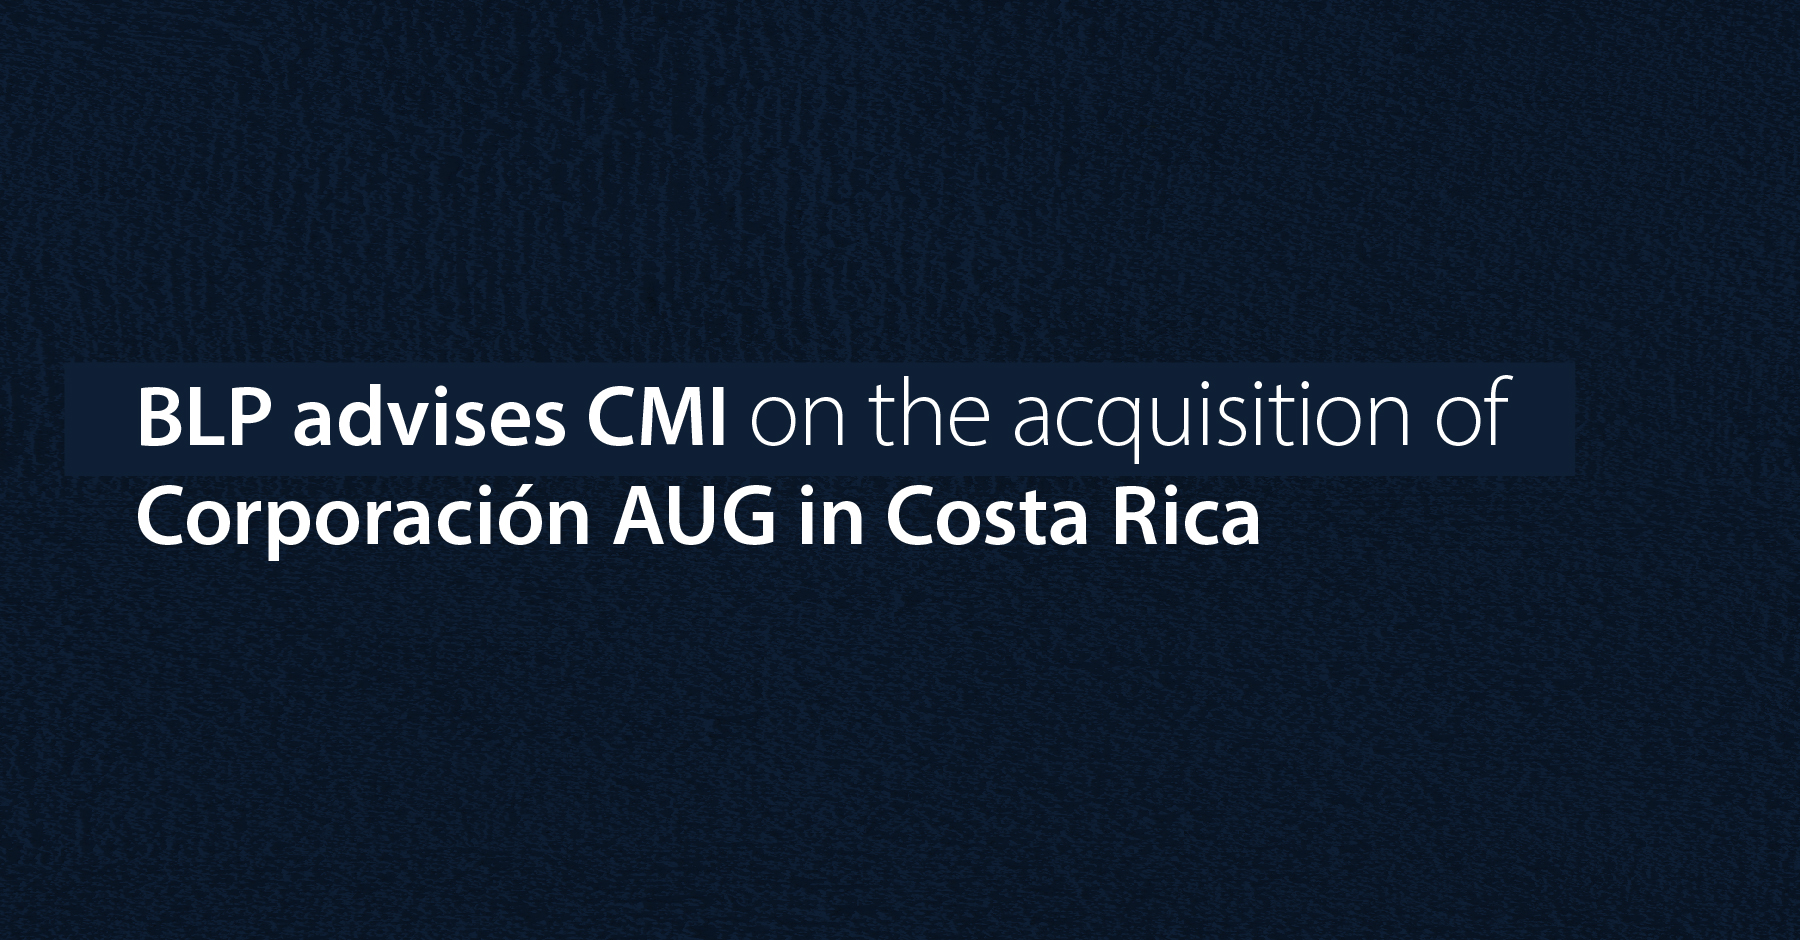 BLP advised CMI on the acquisition of Corporación AUG in Costa Rica